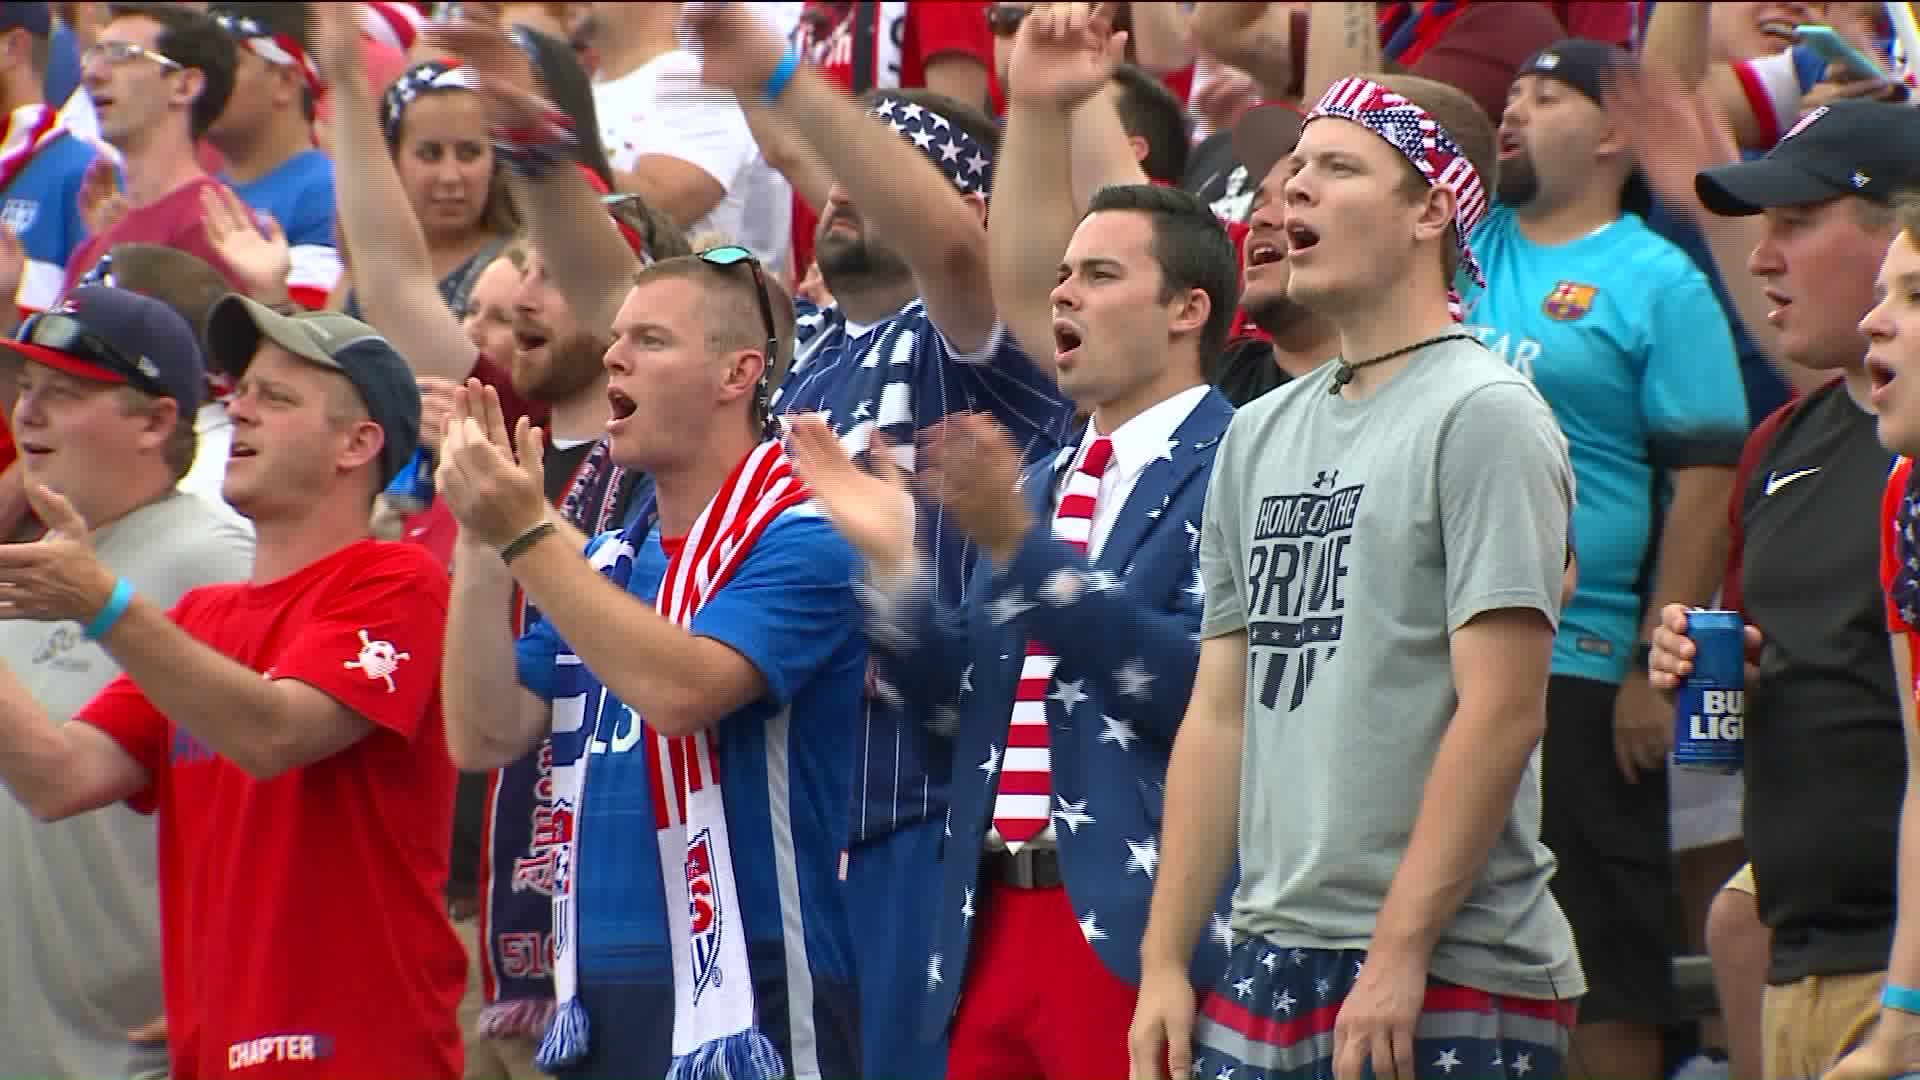 Thousands gathers for USA/Ghana soccer game